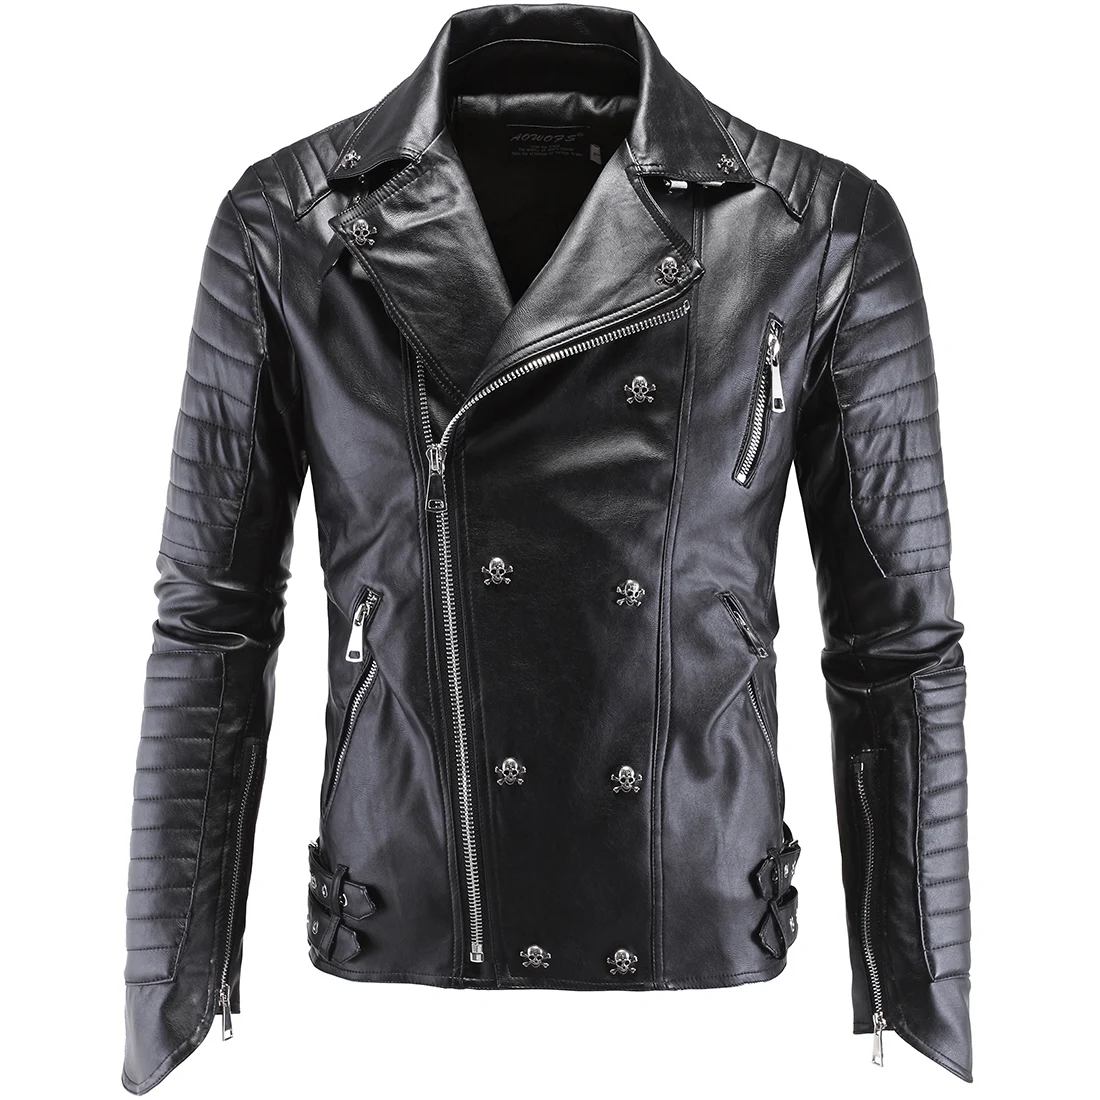 High Quality Men Skulls Leather Jackets PU Leather Coats New Male Slim Fit Casual Leather Jackets High Street Style Moto Jackets